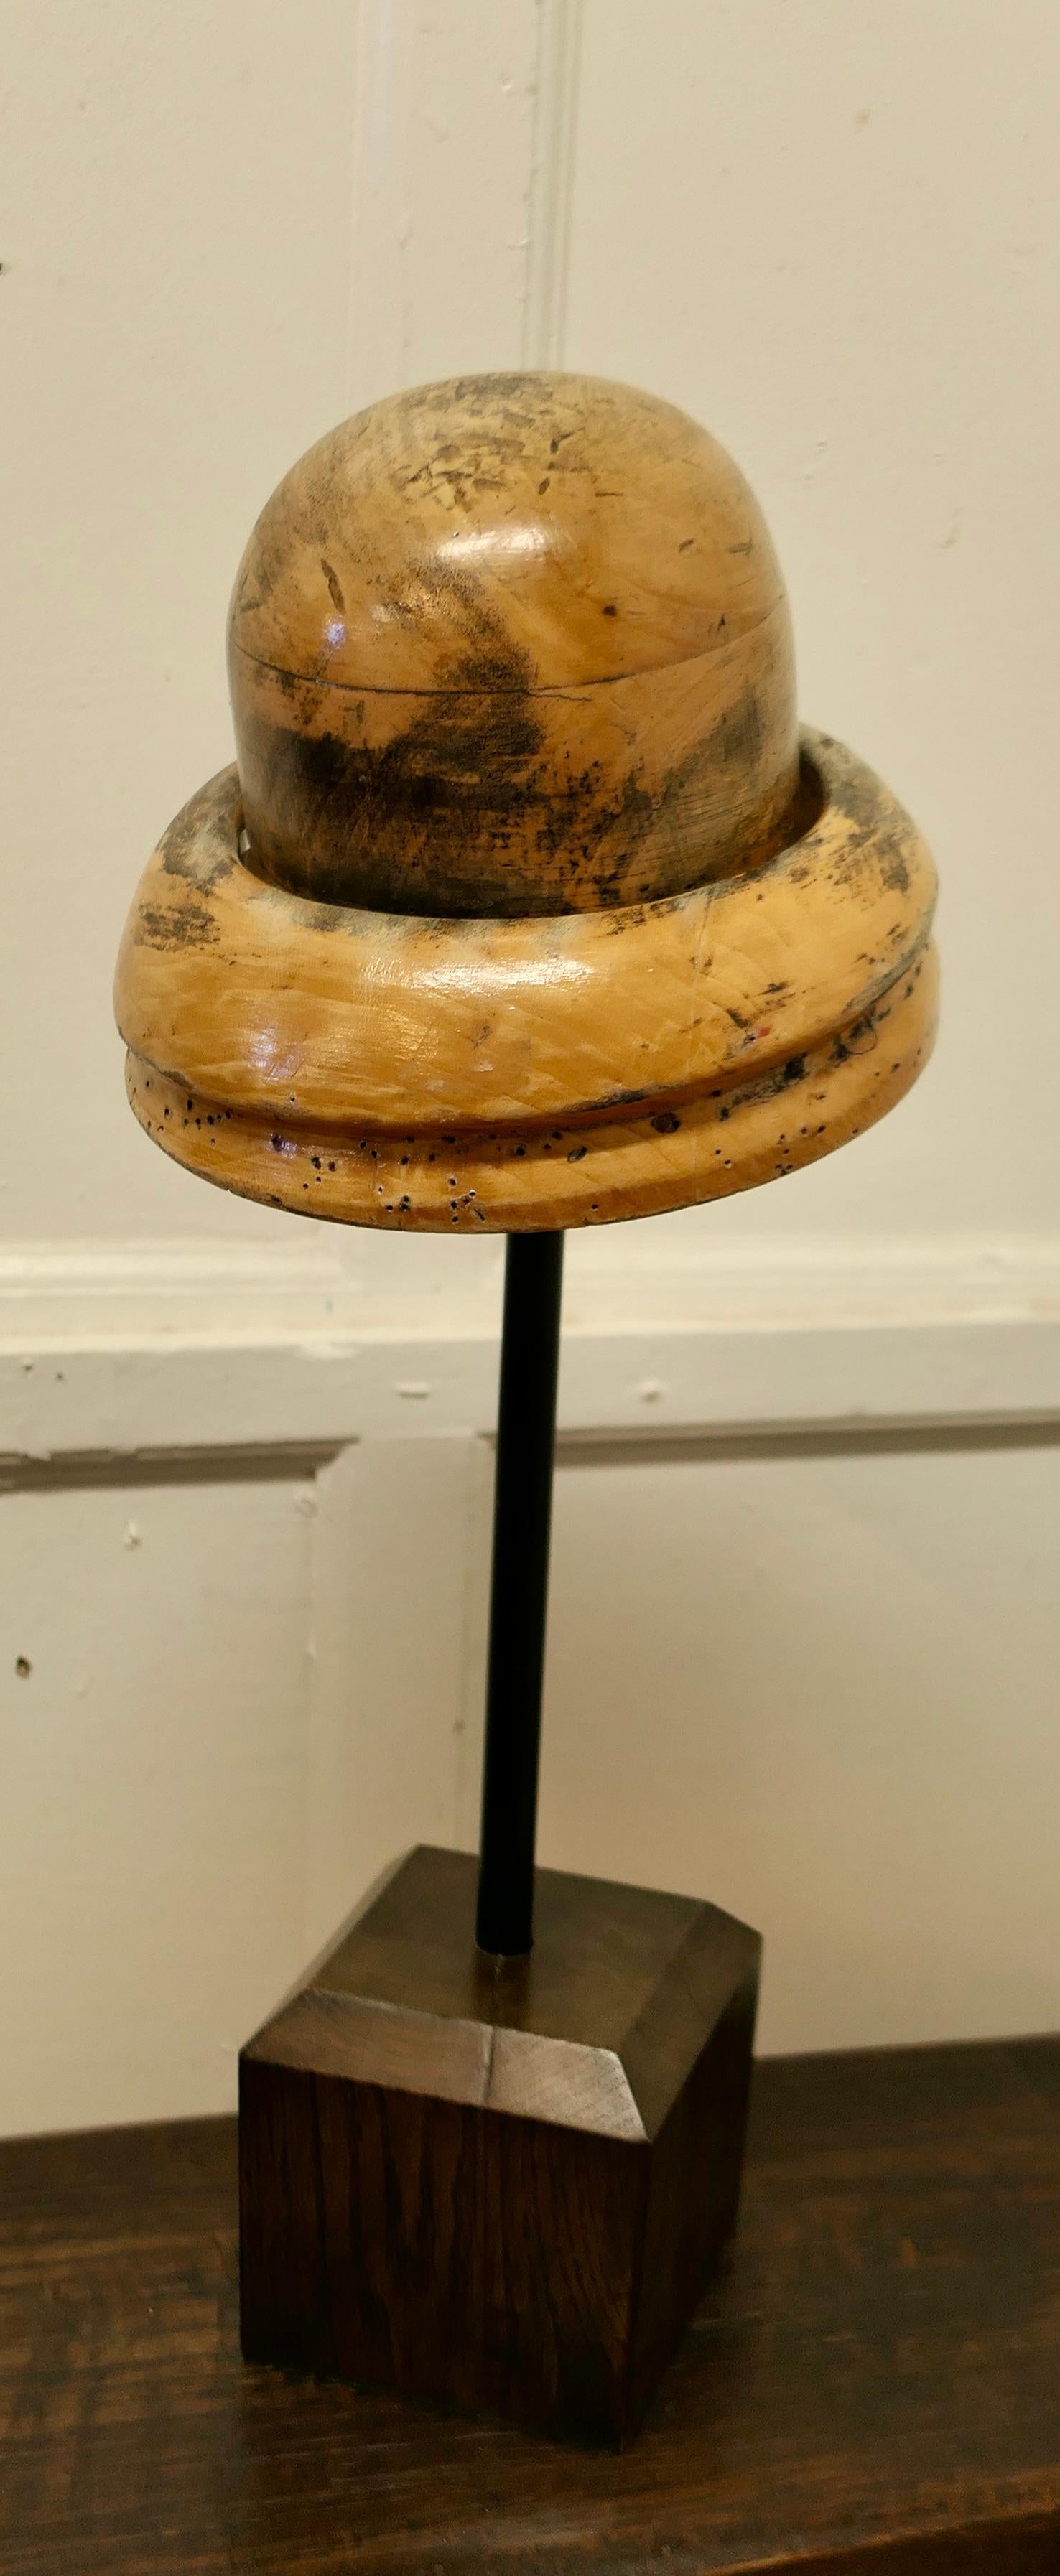 French Fruit Wood Hat Block Milliners Form

This is a form for a 1920s Double Brim Cloche style hat, with a deep round crown and a double brim, it is a superbly tactile and very attractive piece. The hat form is made in fruitwood, and it is on a